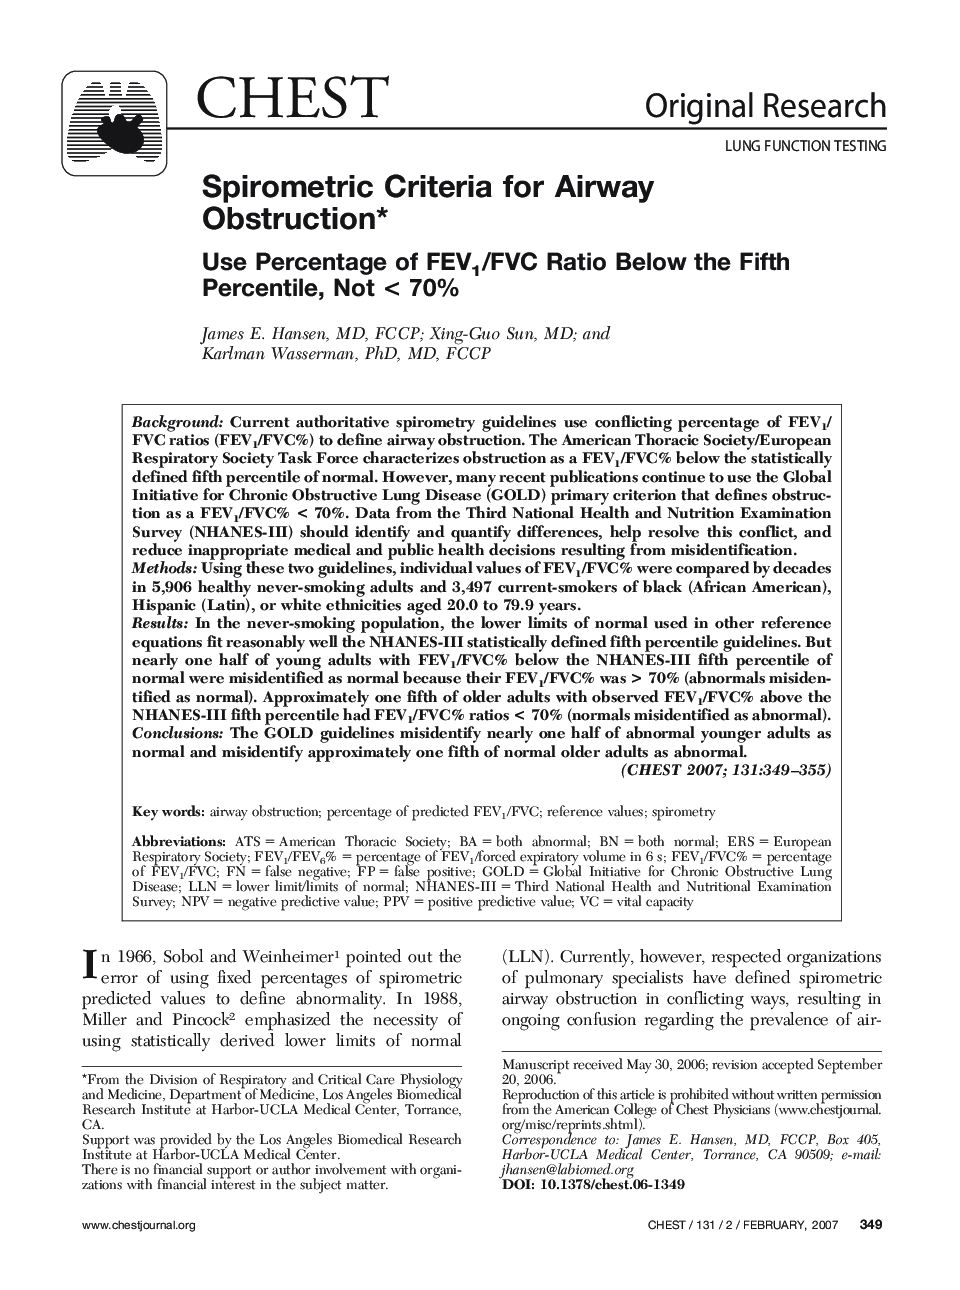 Spirometric Criteria for Airway Obstruction : Use Percentage of FEV1/FVC Ratio Below the Fifth Percentile, Not < 70%